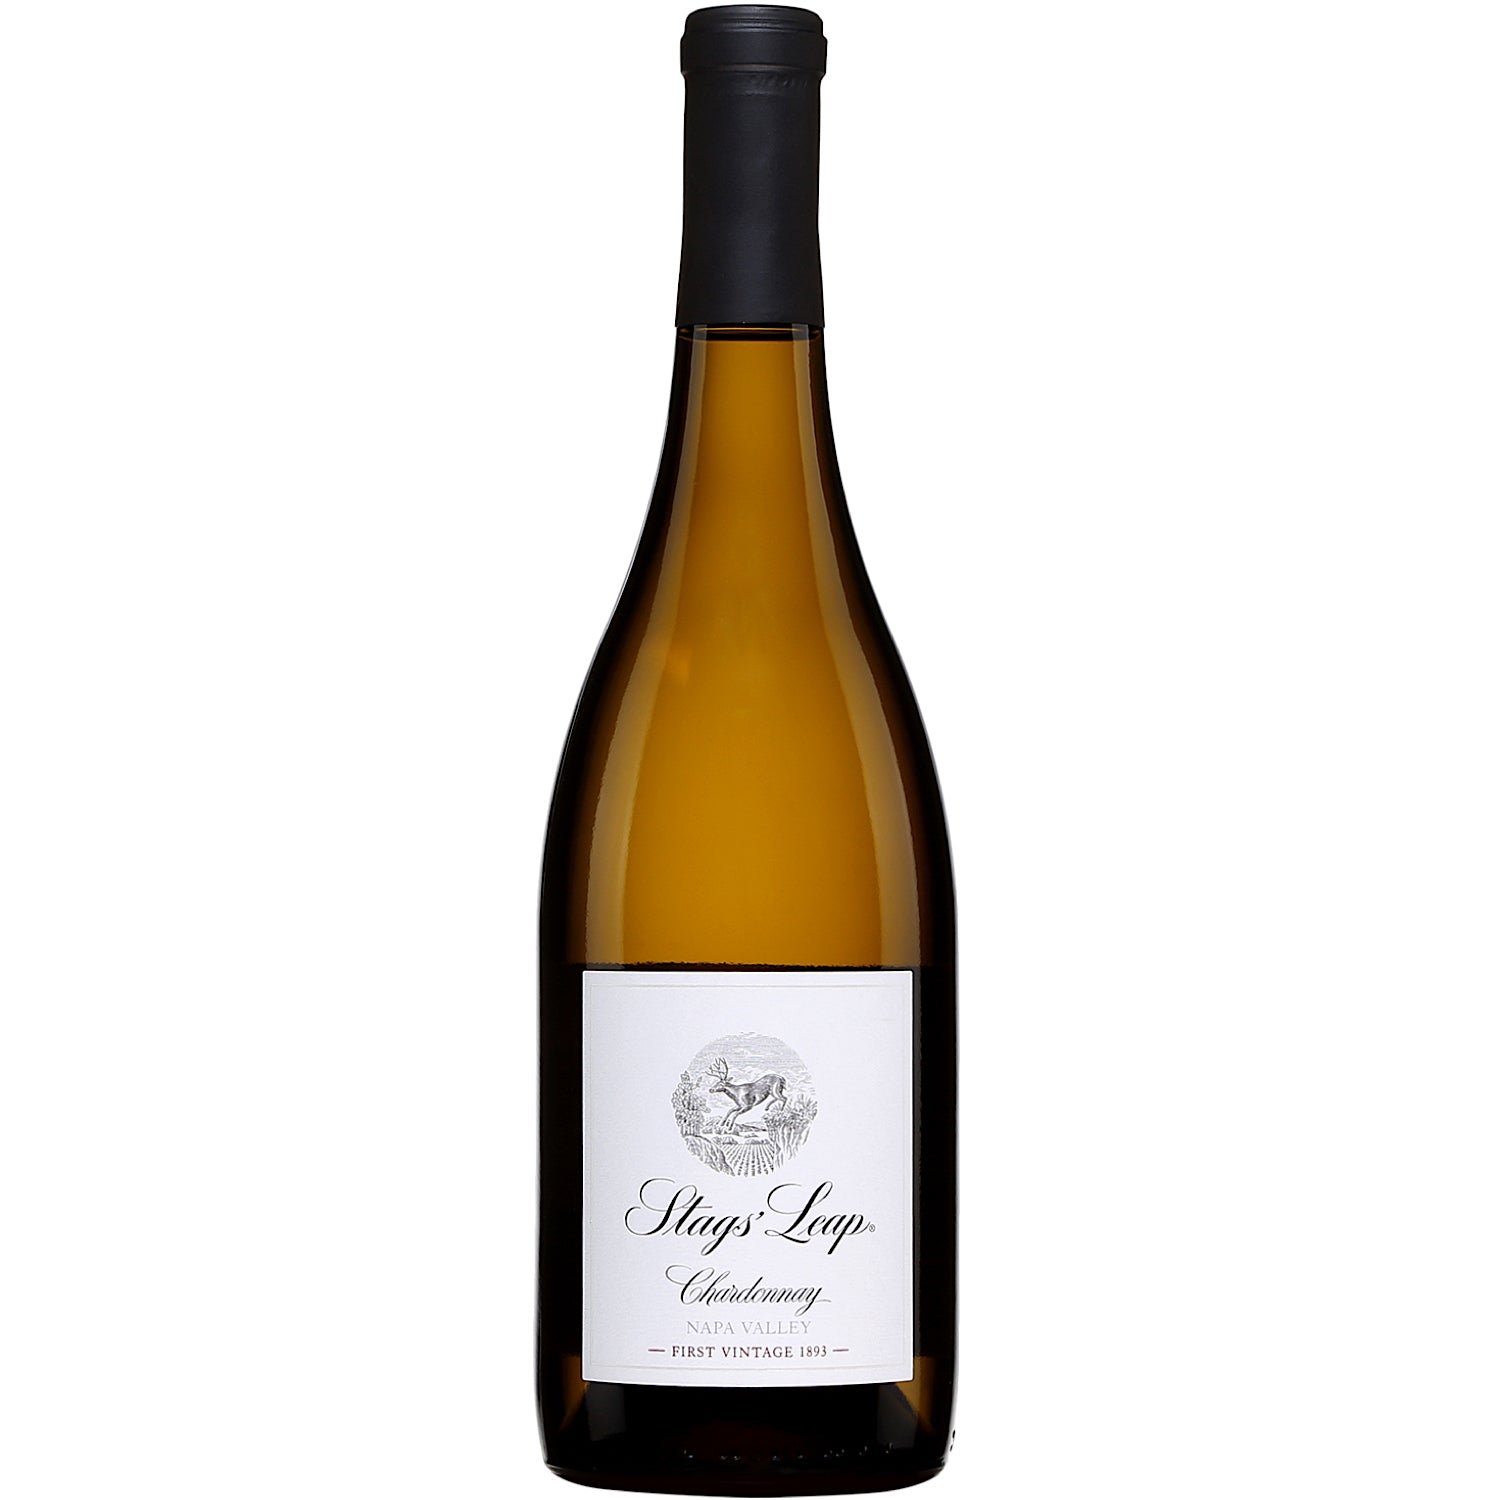 Stags´ Leap Chardonnay [750ml]